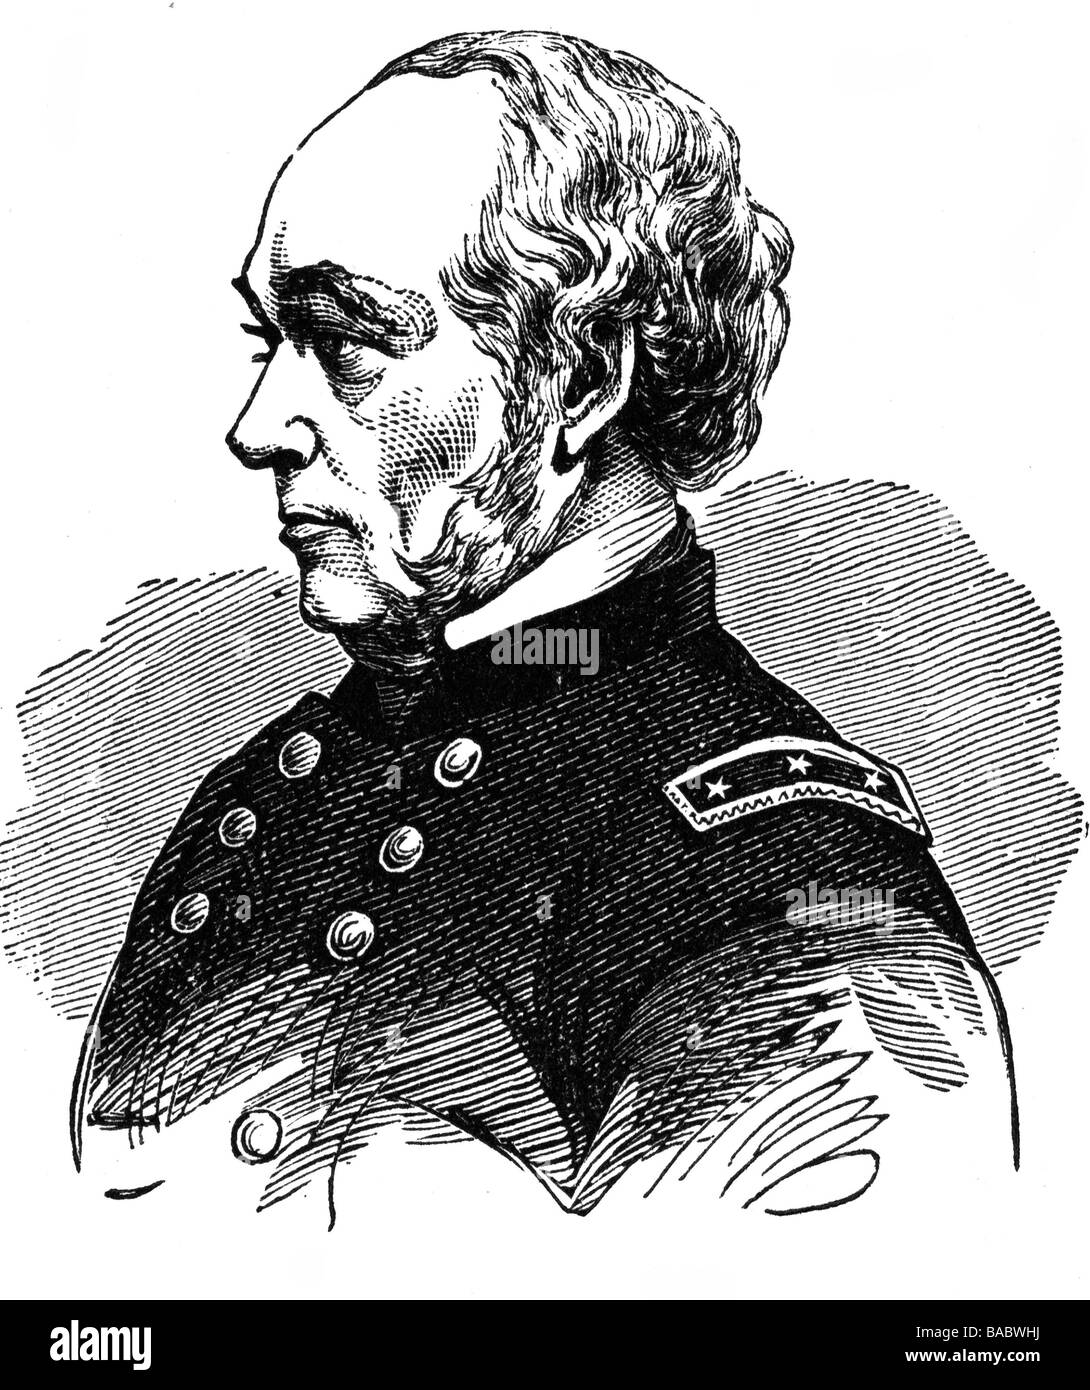 Halleck, Henry W., 15.1.1815 - 9.1.1872, American general, portrait, wood engraving, 19th century, , Stock Photo